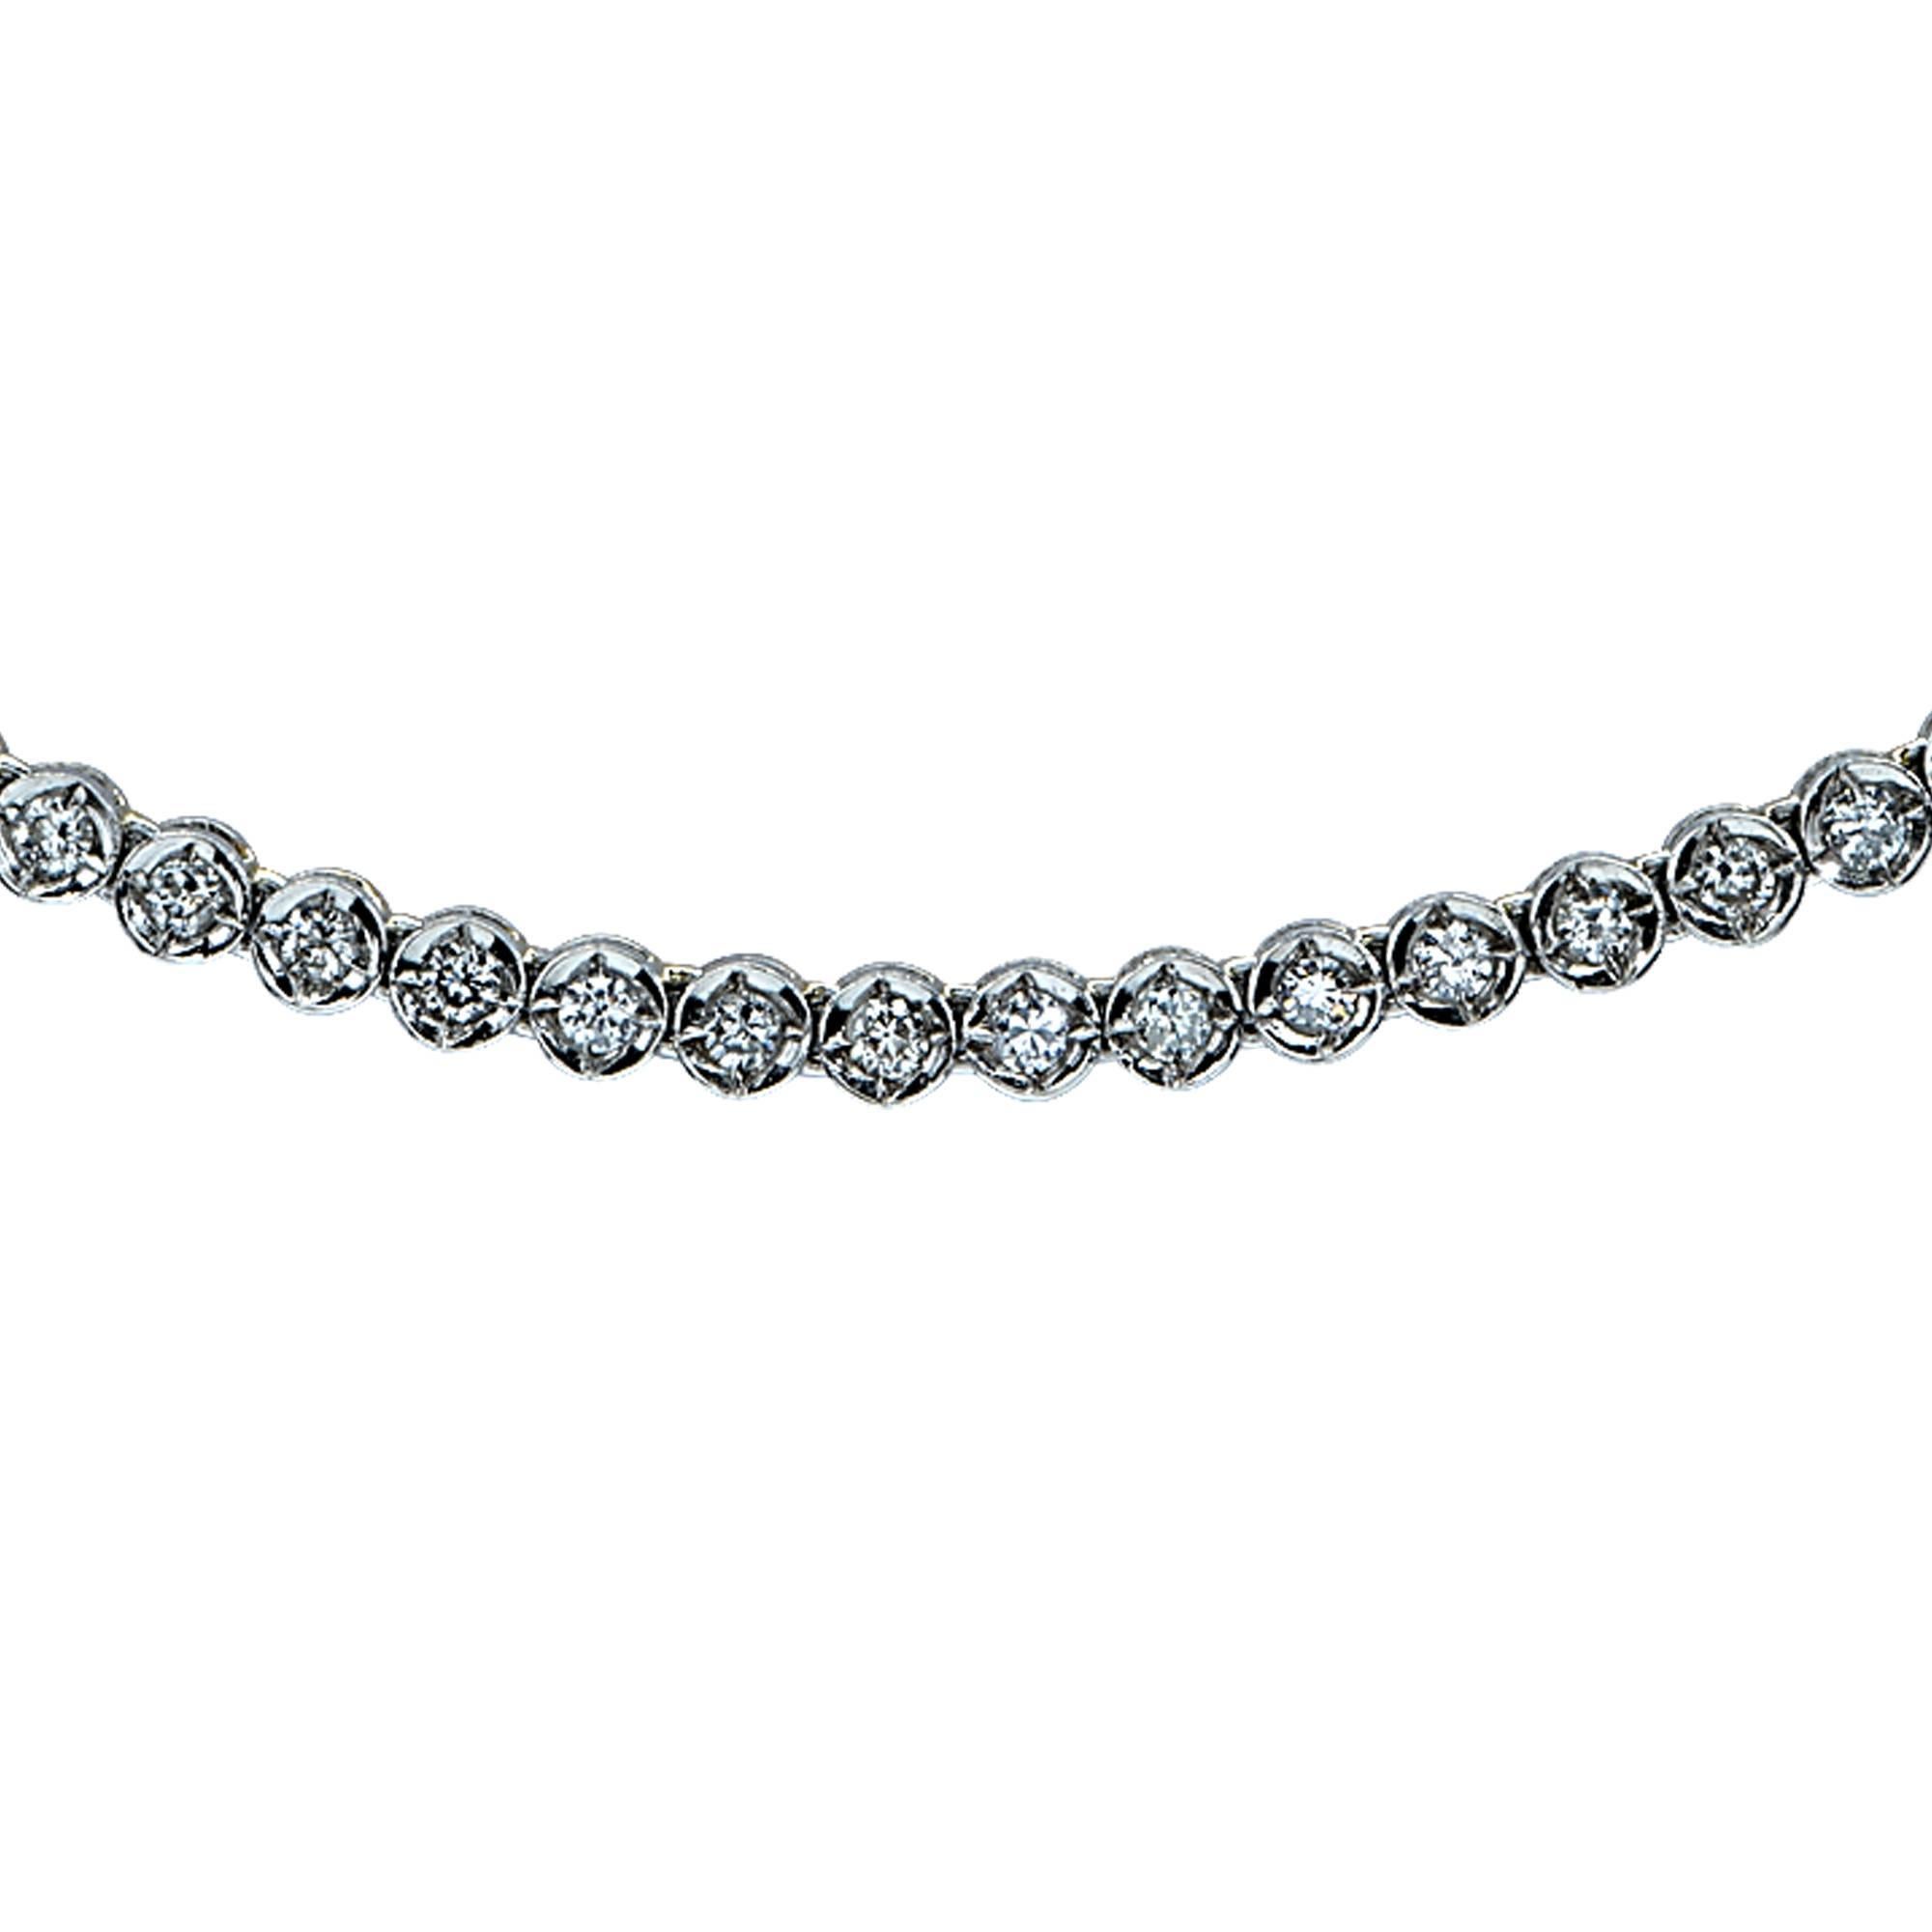 Beautiful platinum diamond line necklace featuring 126 round brilliant cut diamonds weighing approximately 3cts total, H-I color, SI- I1 clarity. This necklace measures 16.25 inches in length and 3.2mm in width.

It is stamped and/or tested as